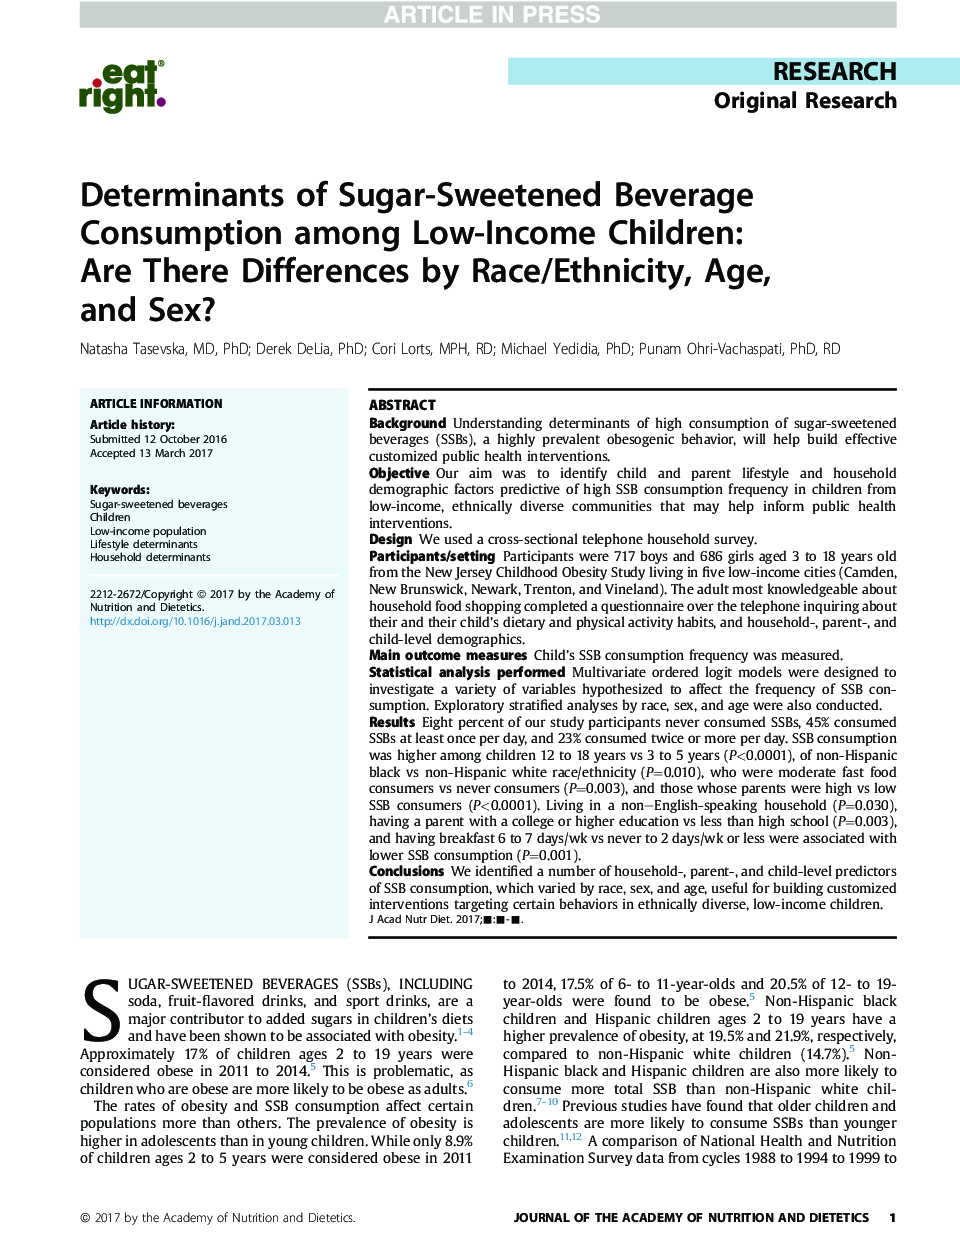 Determinants of Sugar-Sweetened Beverage Consumption among Low-Income Children: AreÂ There Differences by Race/Ethnicity, Age, and Sex?